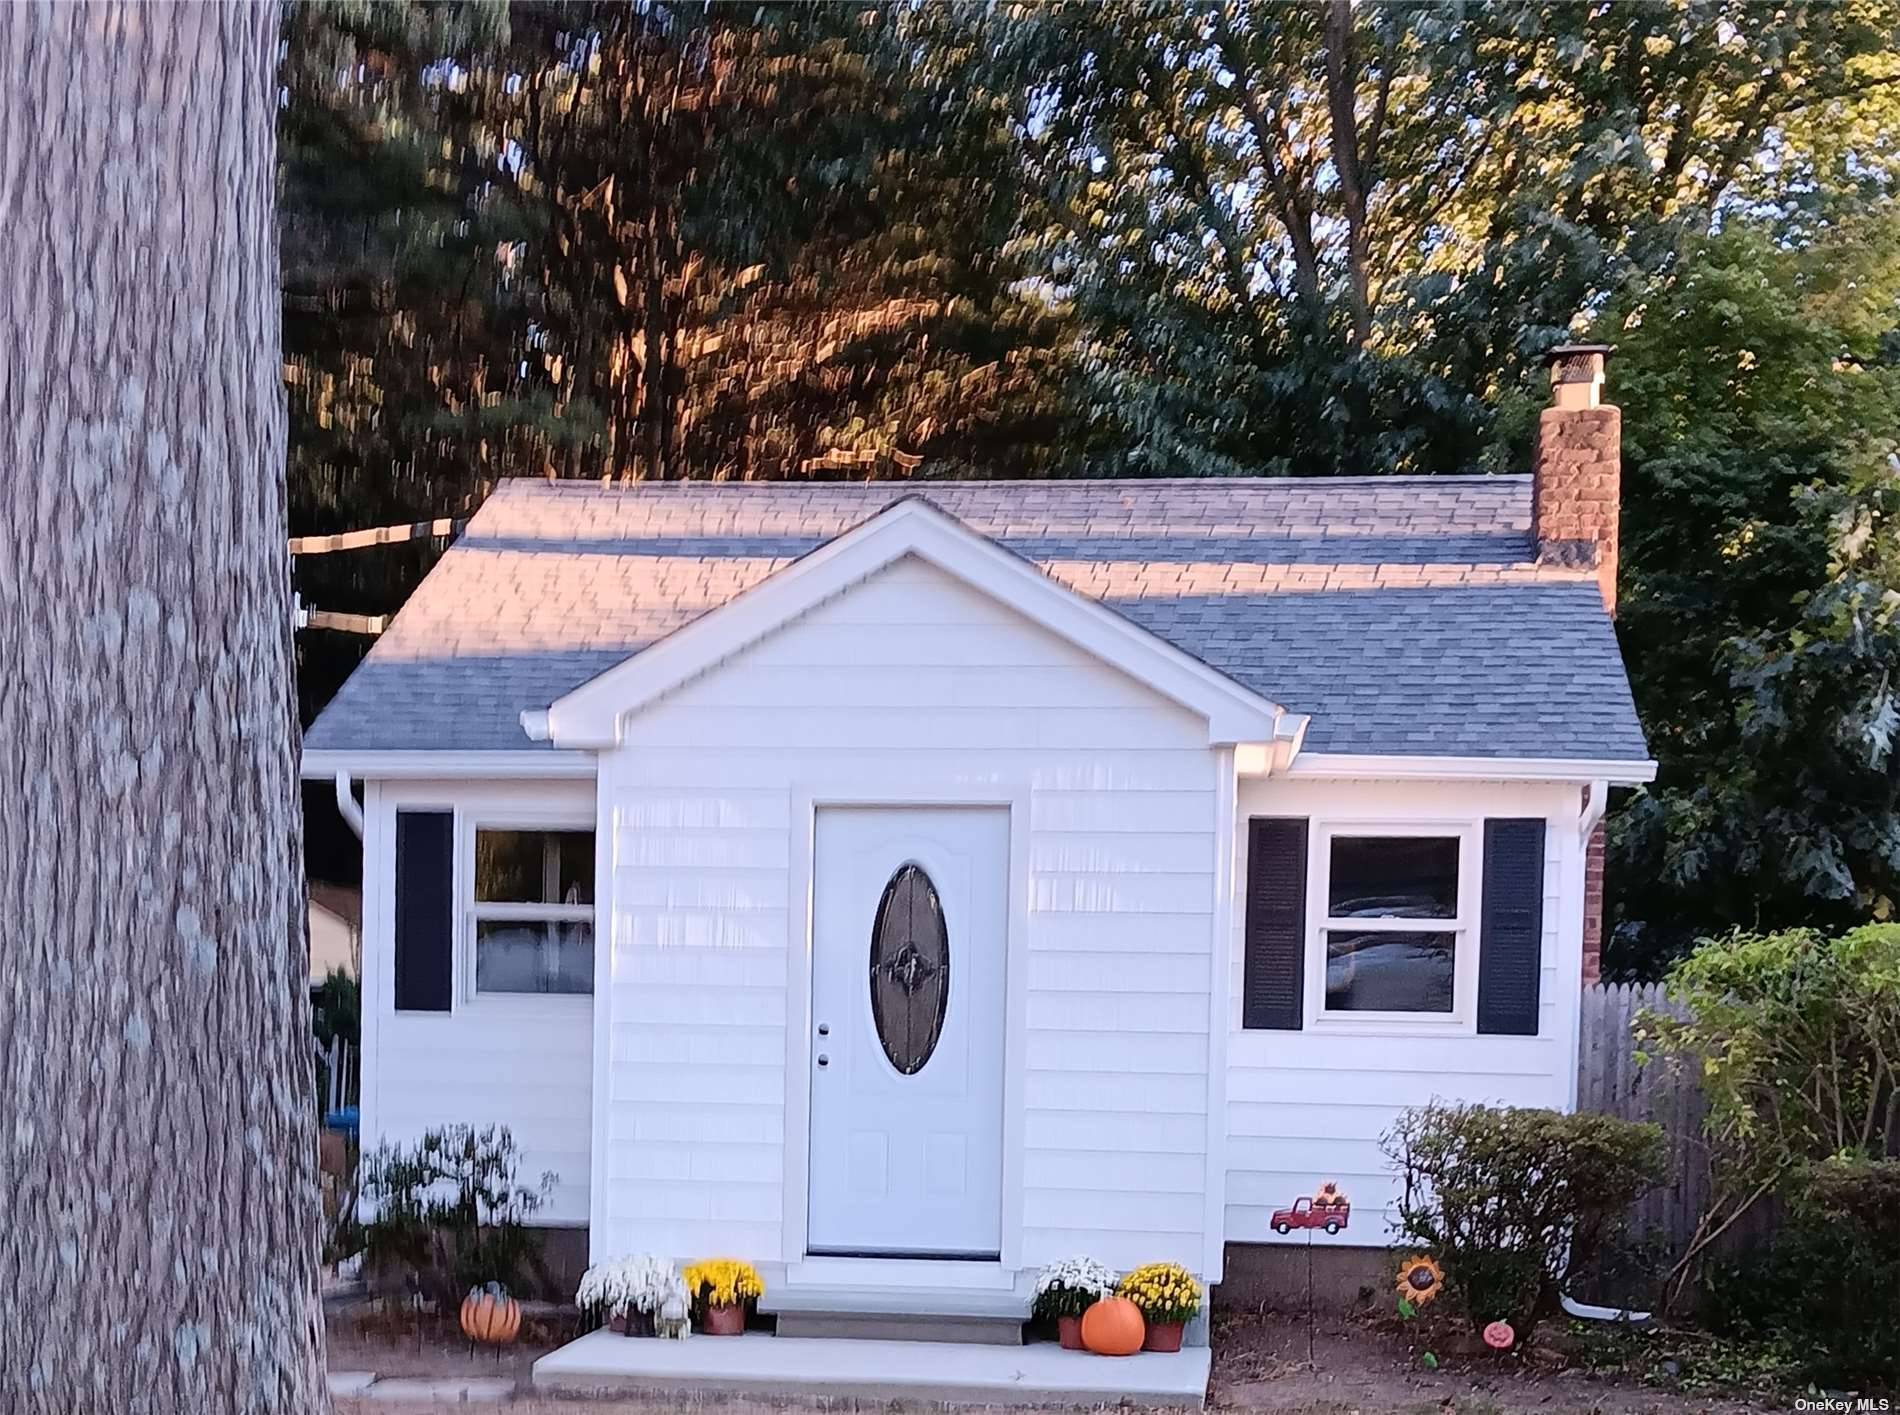 The exterior of this Cozy Cottage has been updated with a new roof, siding, doors and windows.